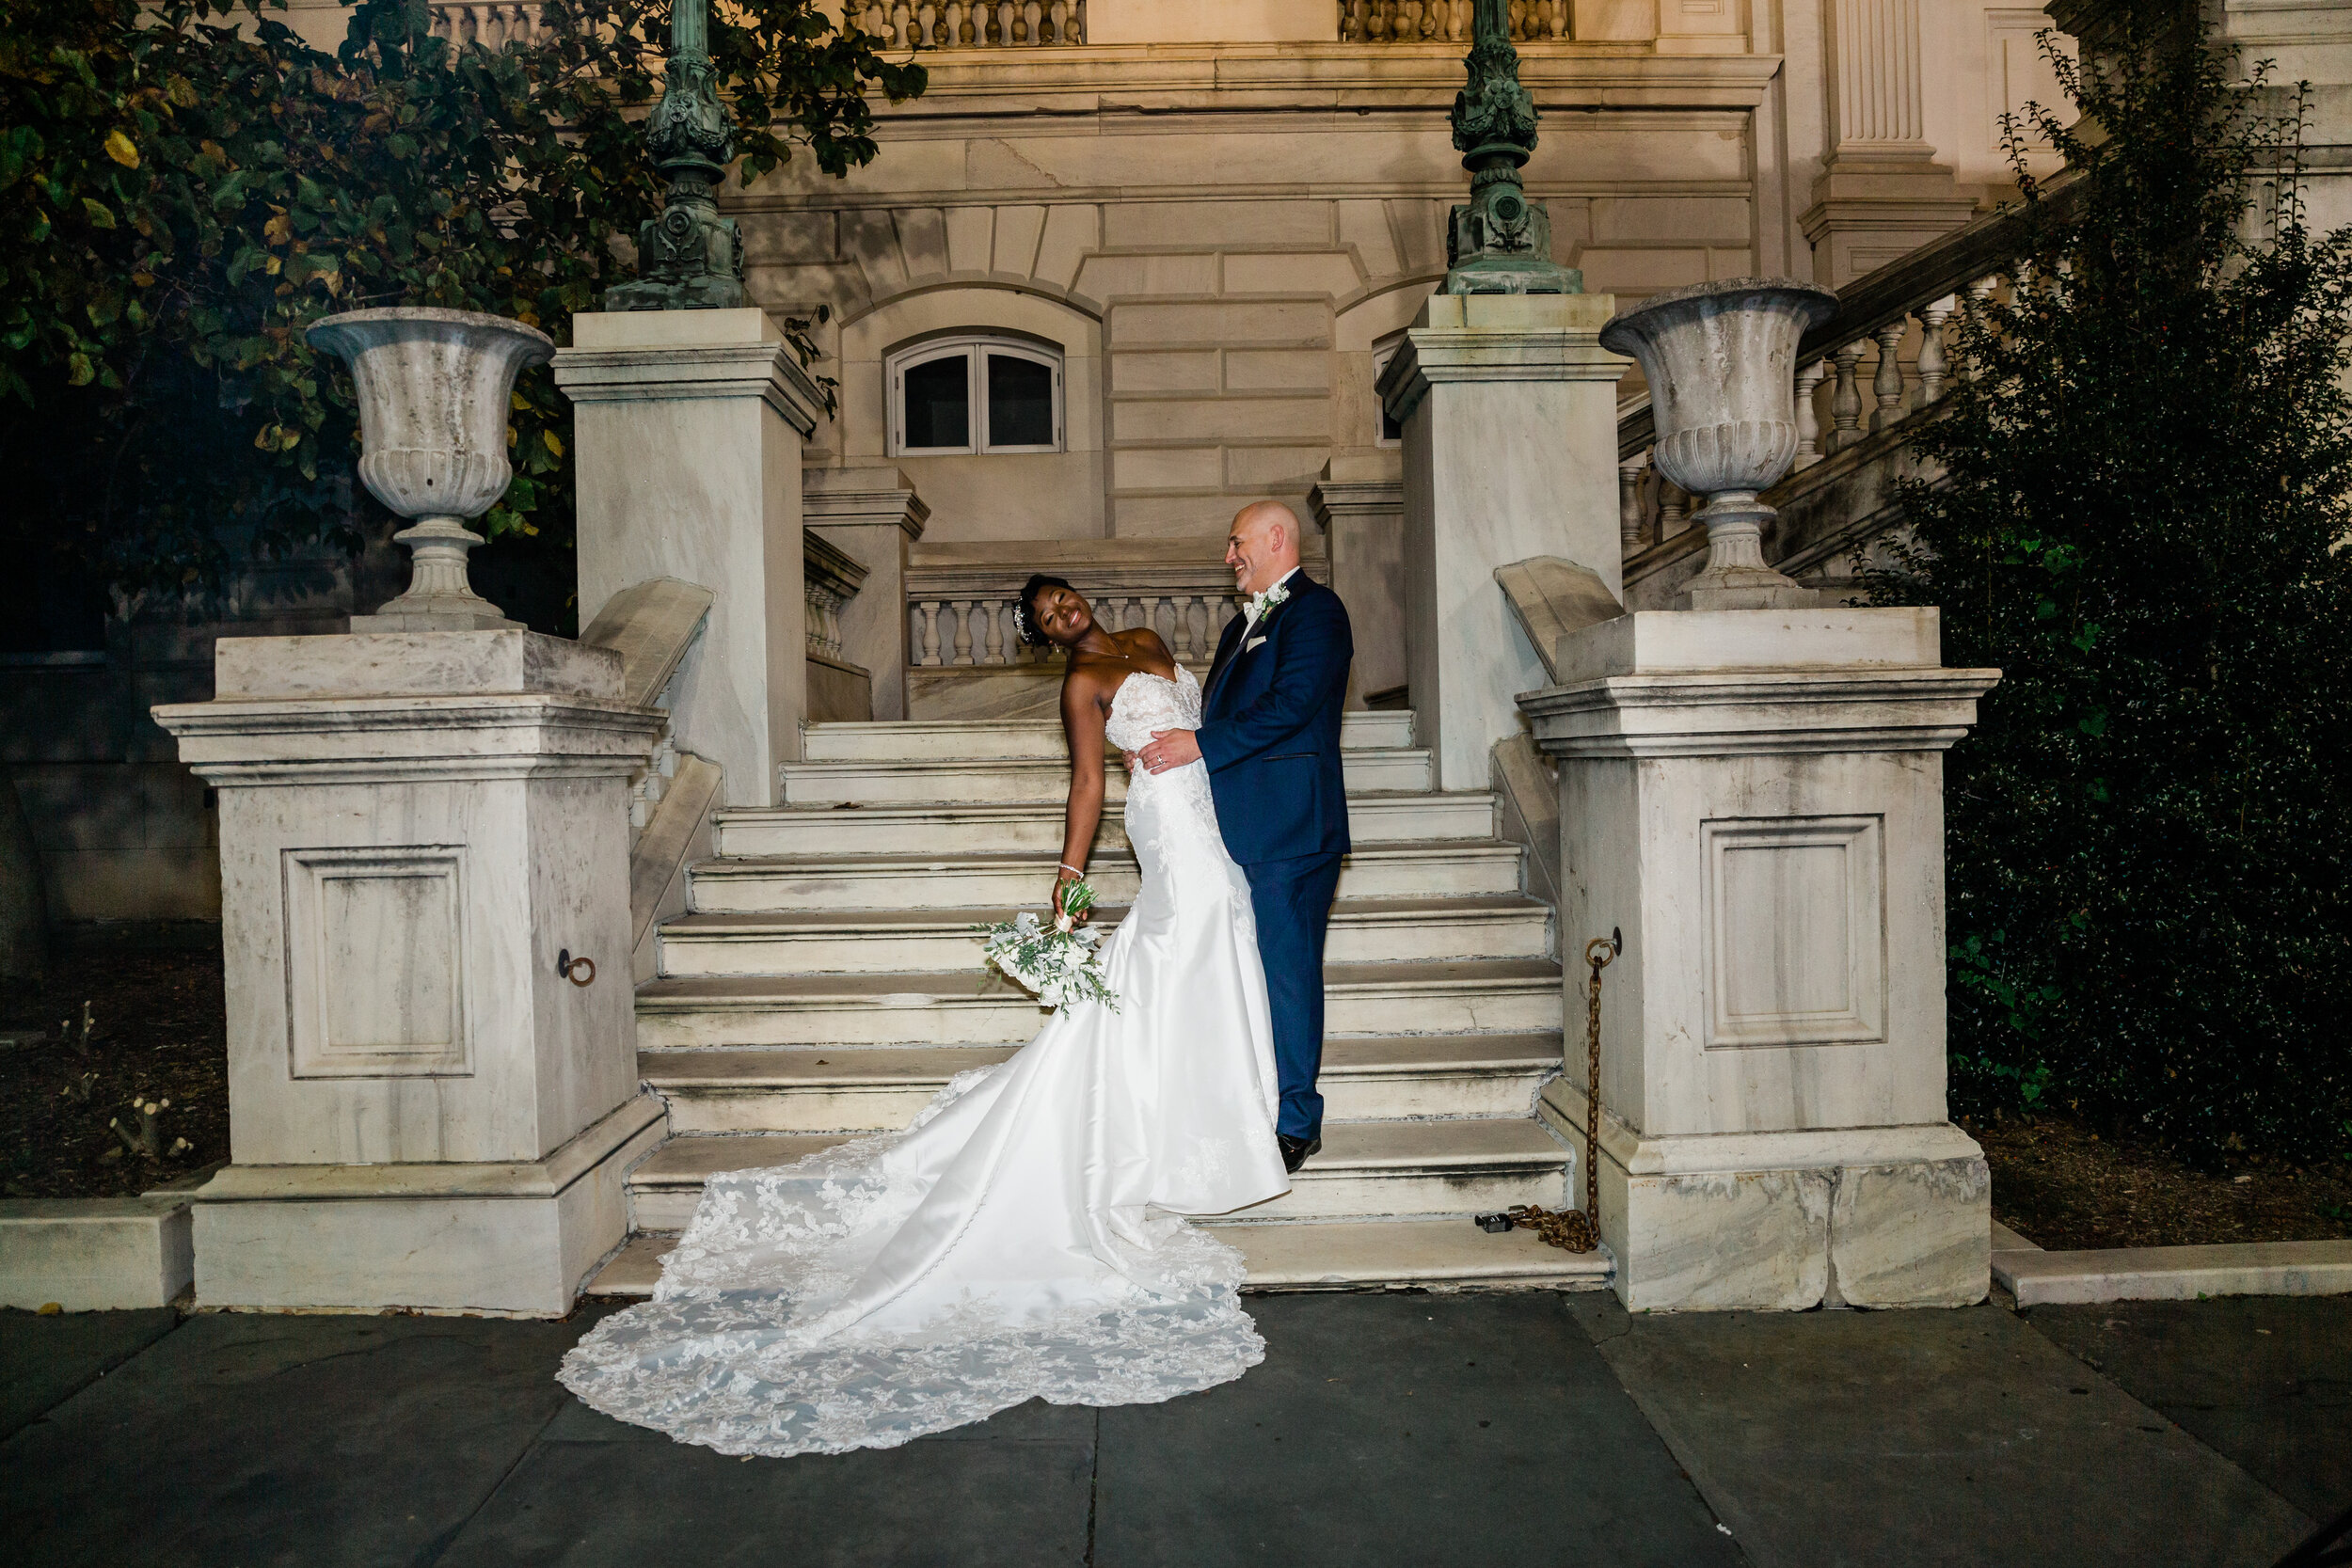 get married in baltimore city hall shot by megapixels media biracial couple wedding photographers maryland-89.jpg